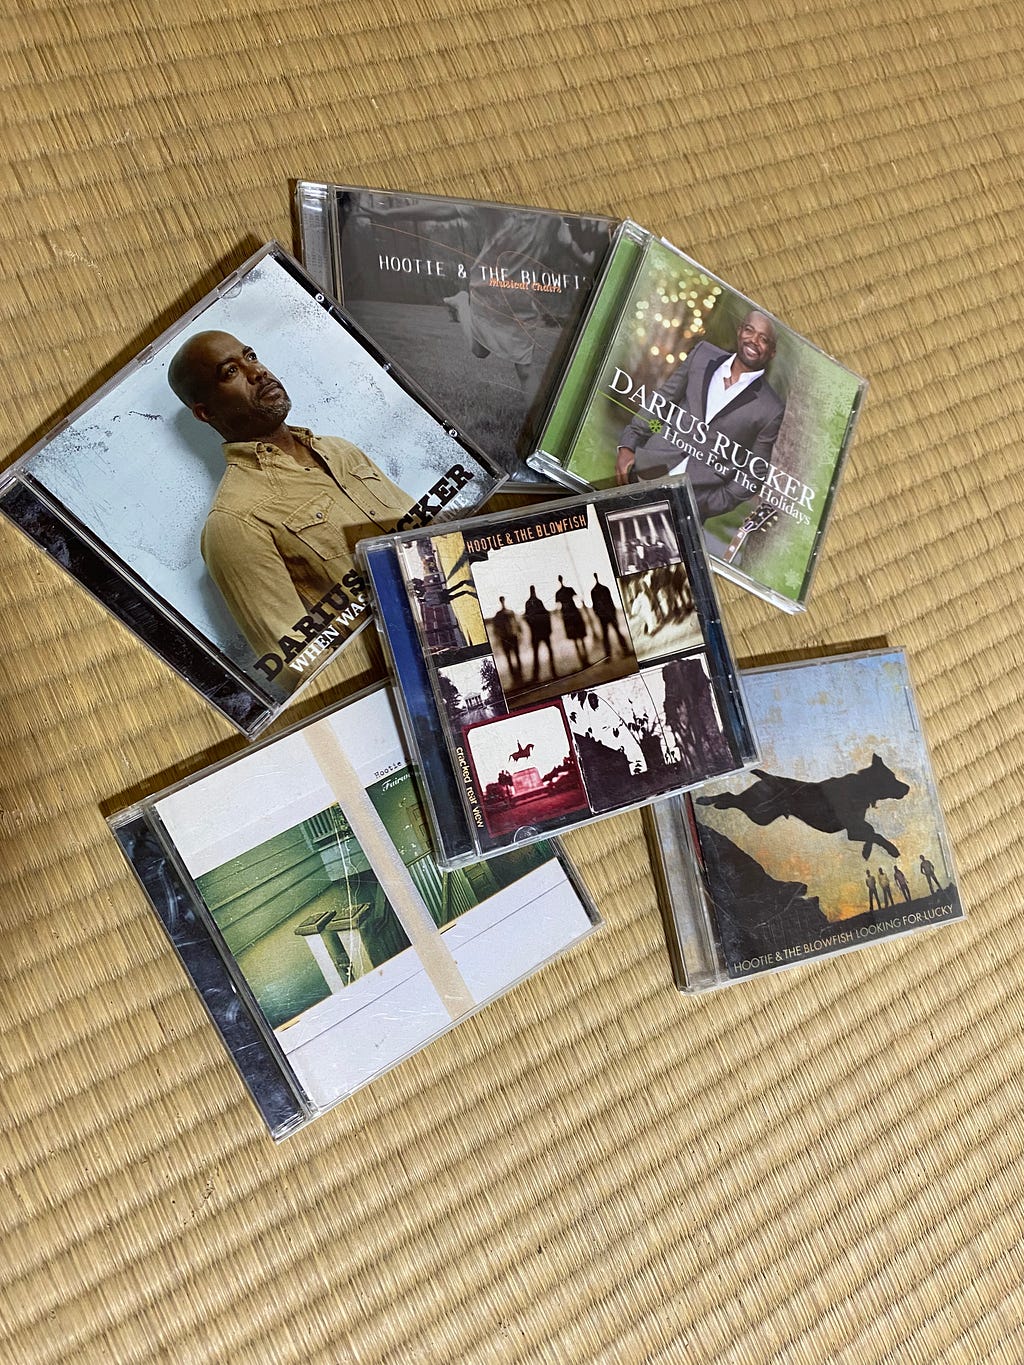 A pile of Hootie & the Blowfish CDs on a tatami mat floor.